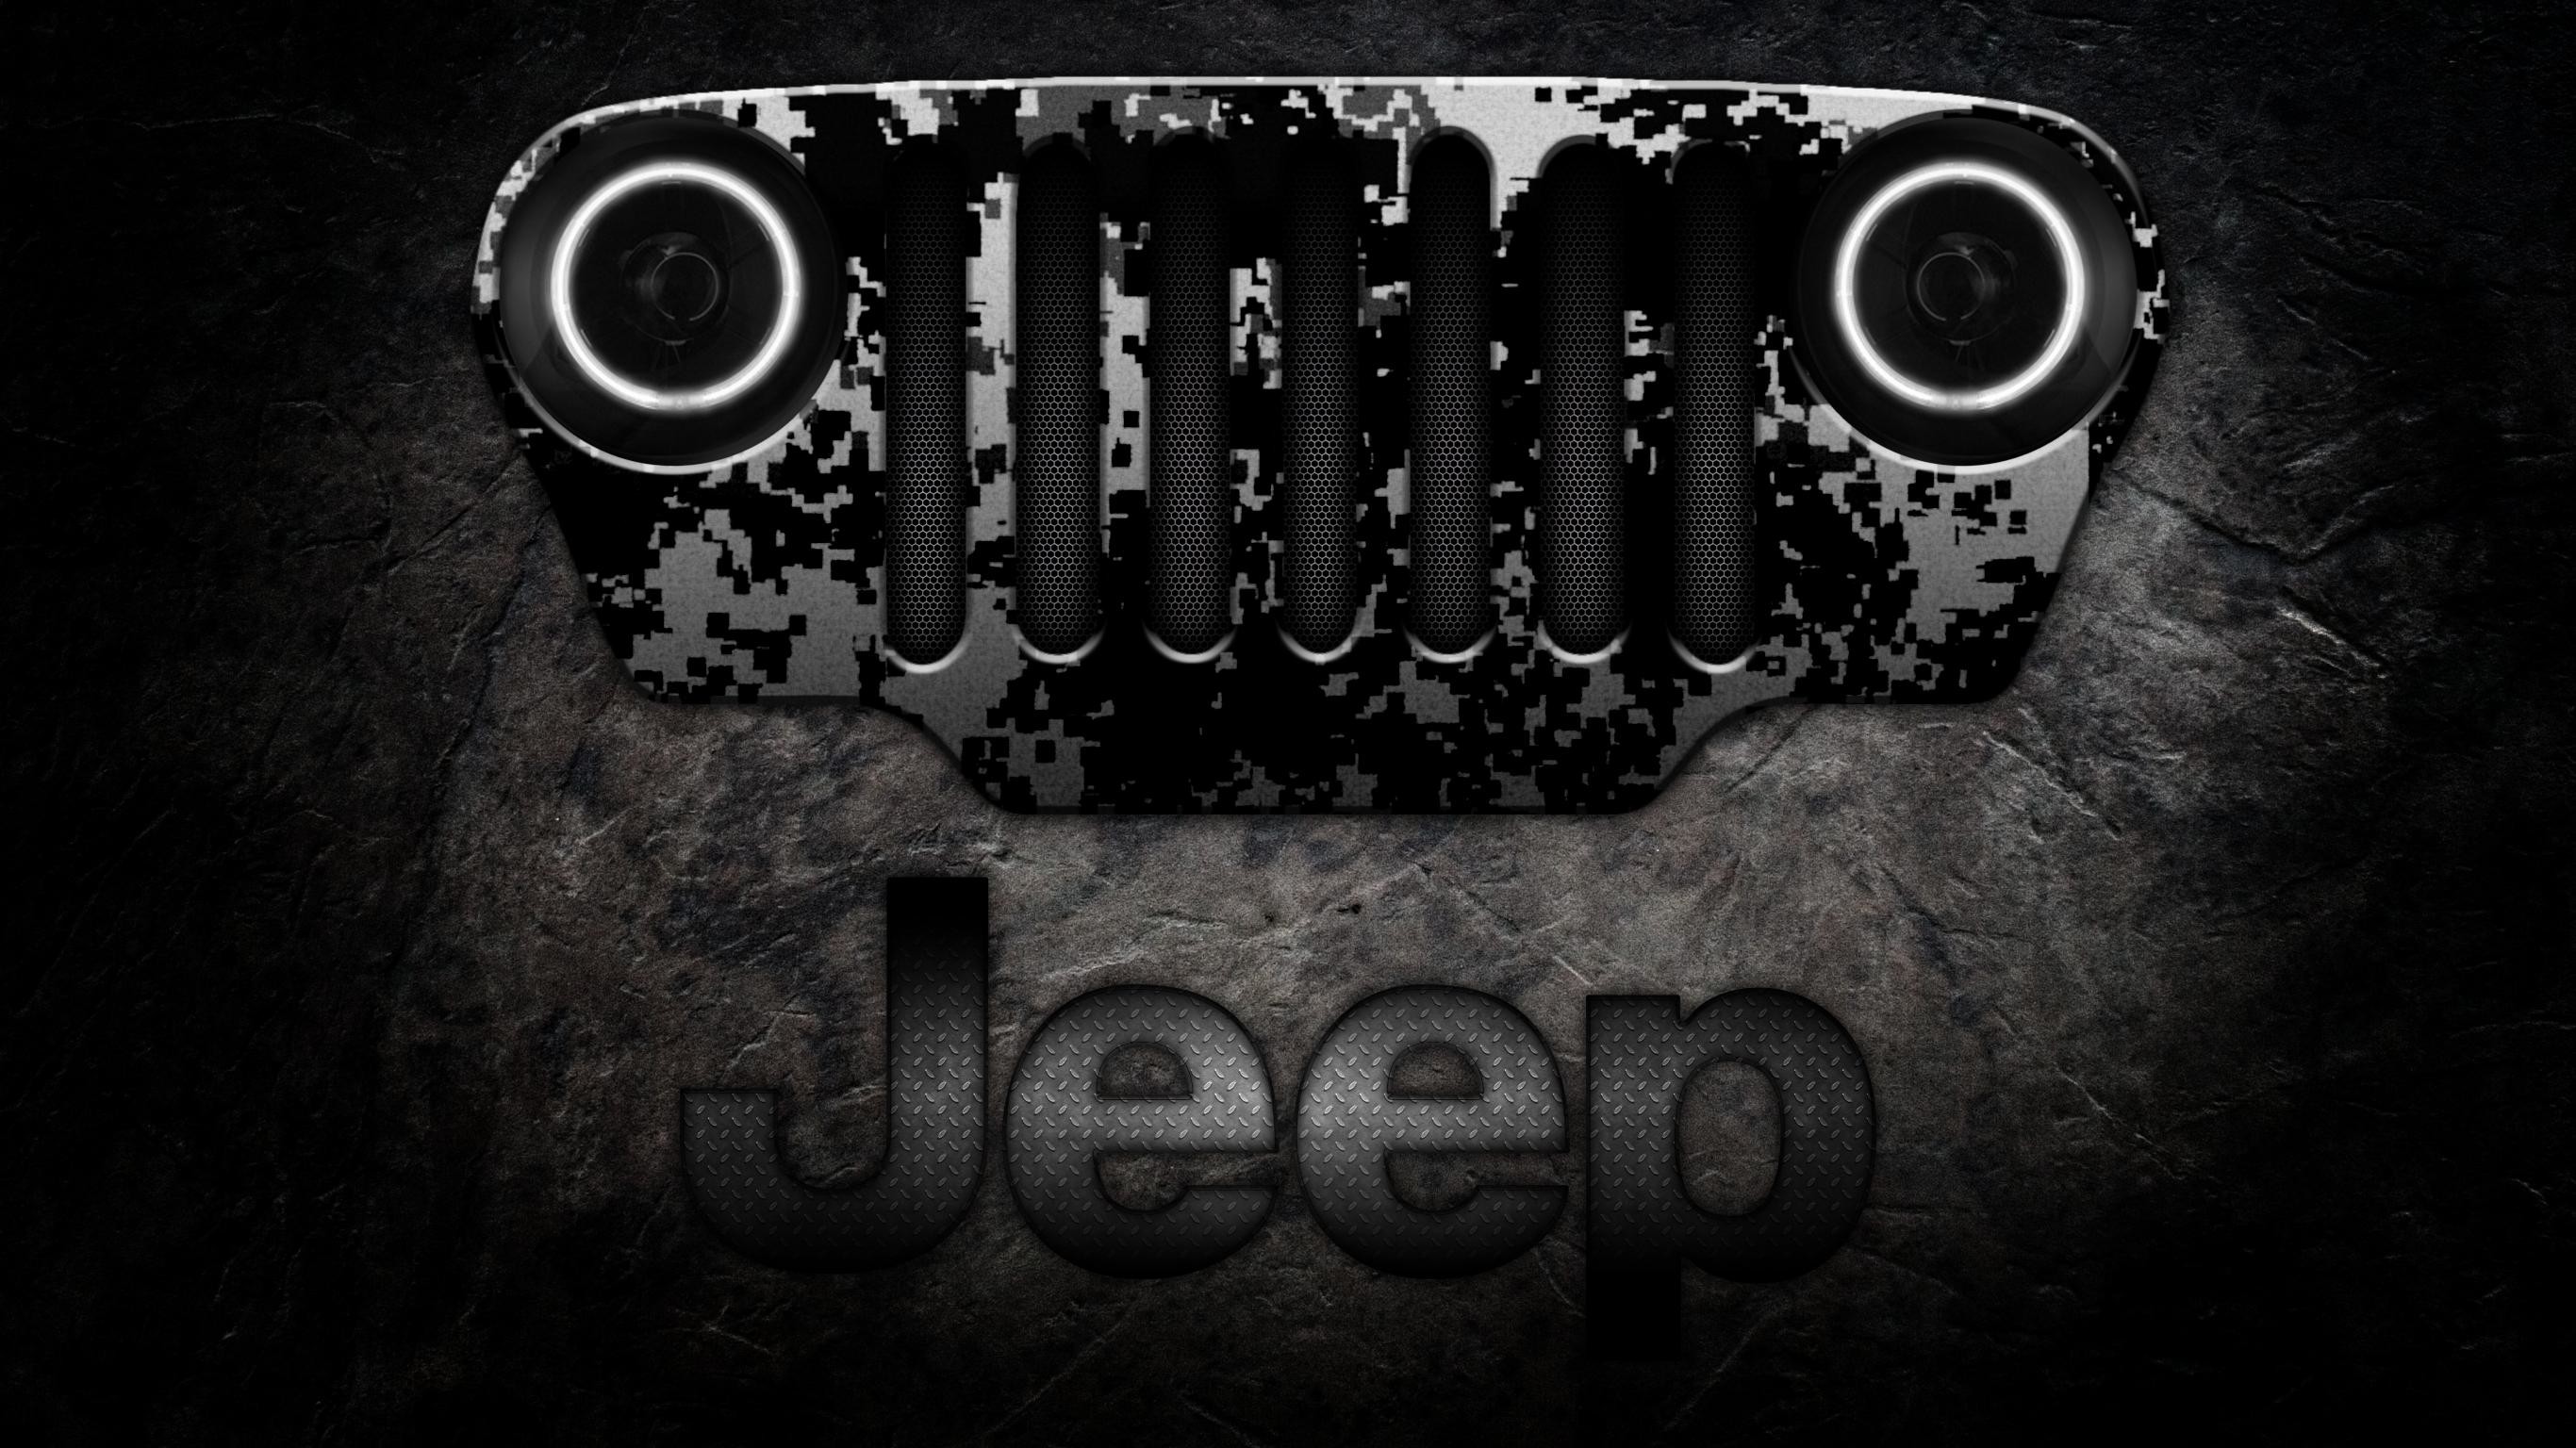 2732x1536 Jeep Wallpapers High Definition Wallpapers Jeep Pinterest 1600Ã1200 Jeep  Wallpapers (49 Wallpapers) | Adorable Wallpapers | Wallpapers | Pinterest |  ...